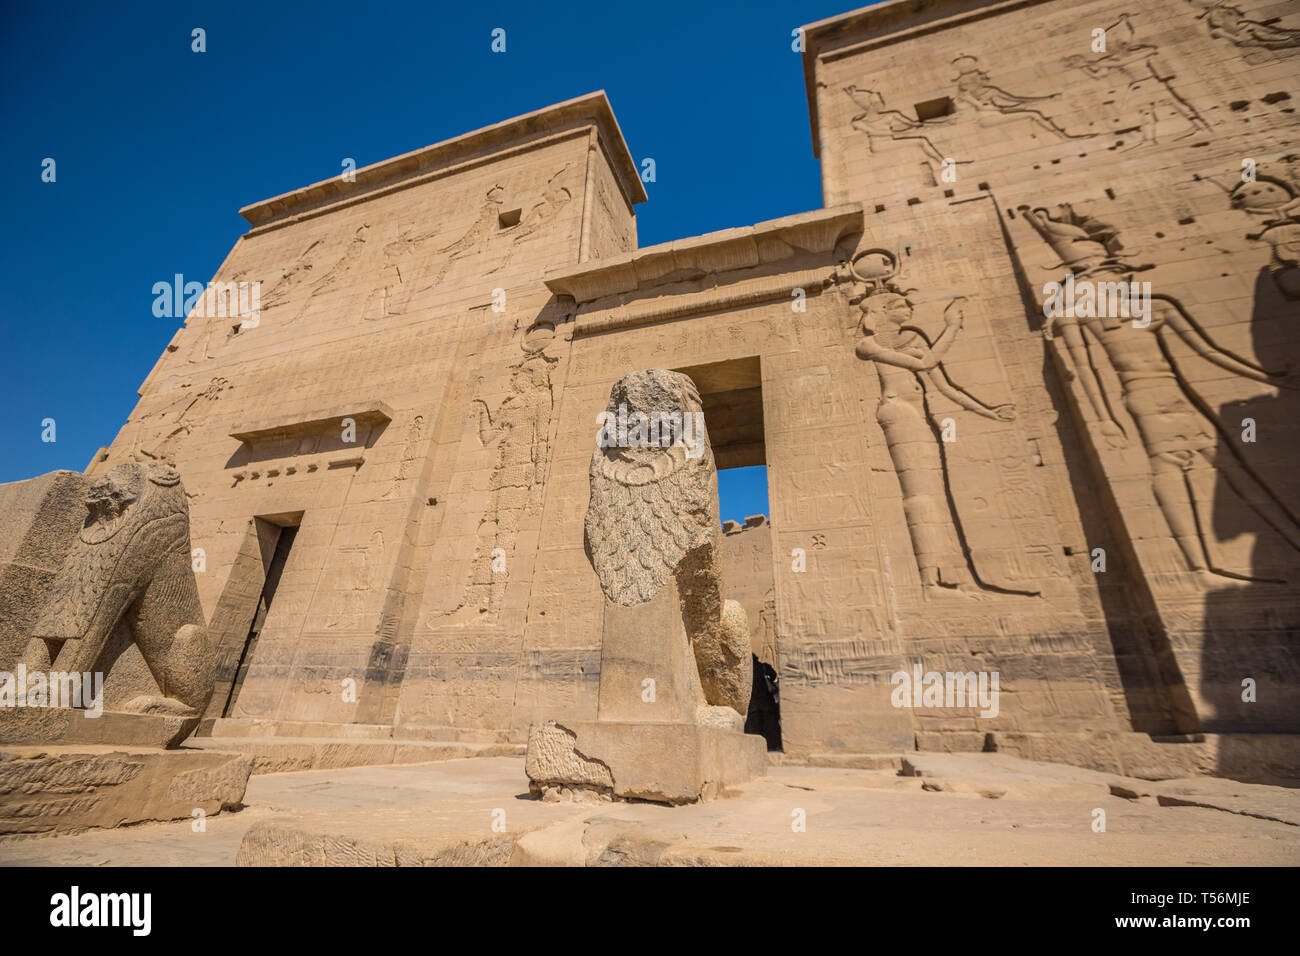 Temple of Philae in Aswan Egypt Stock Photo